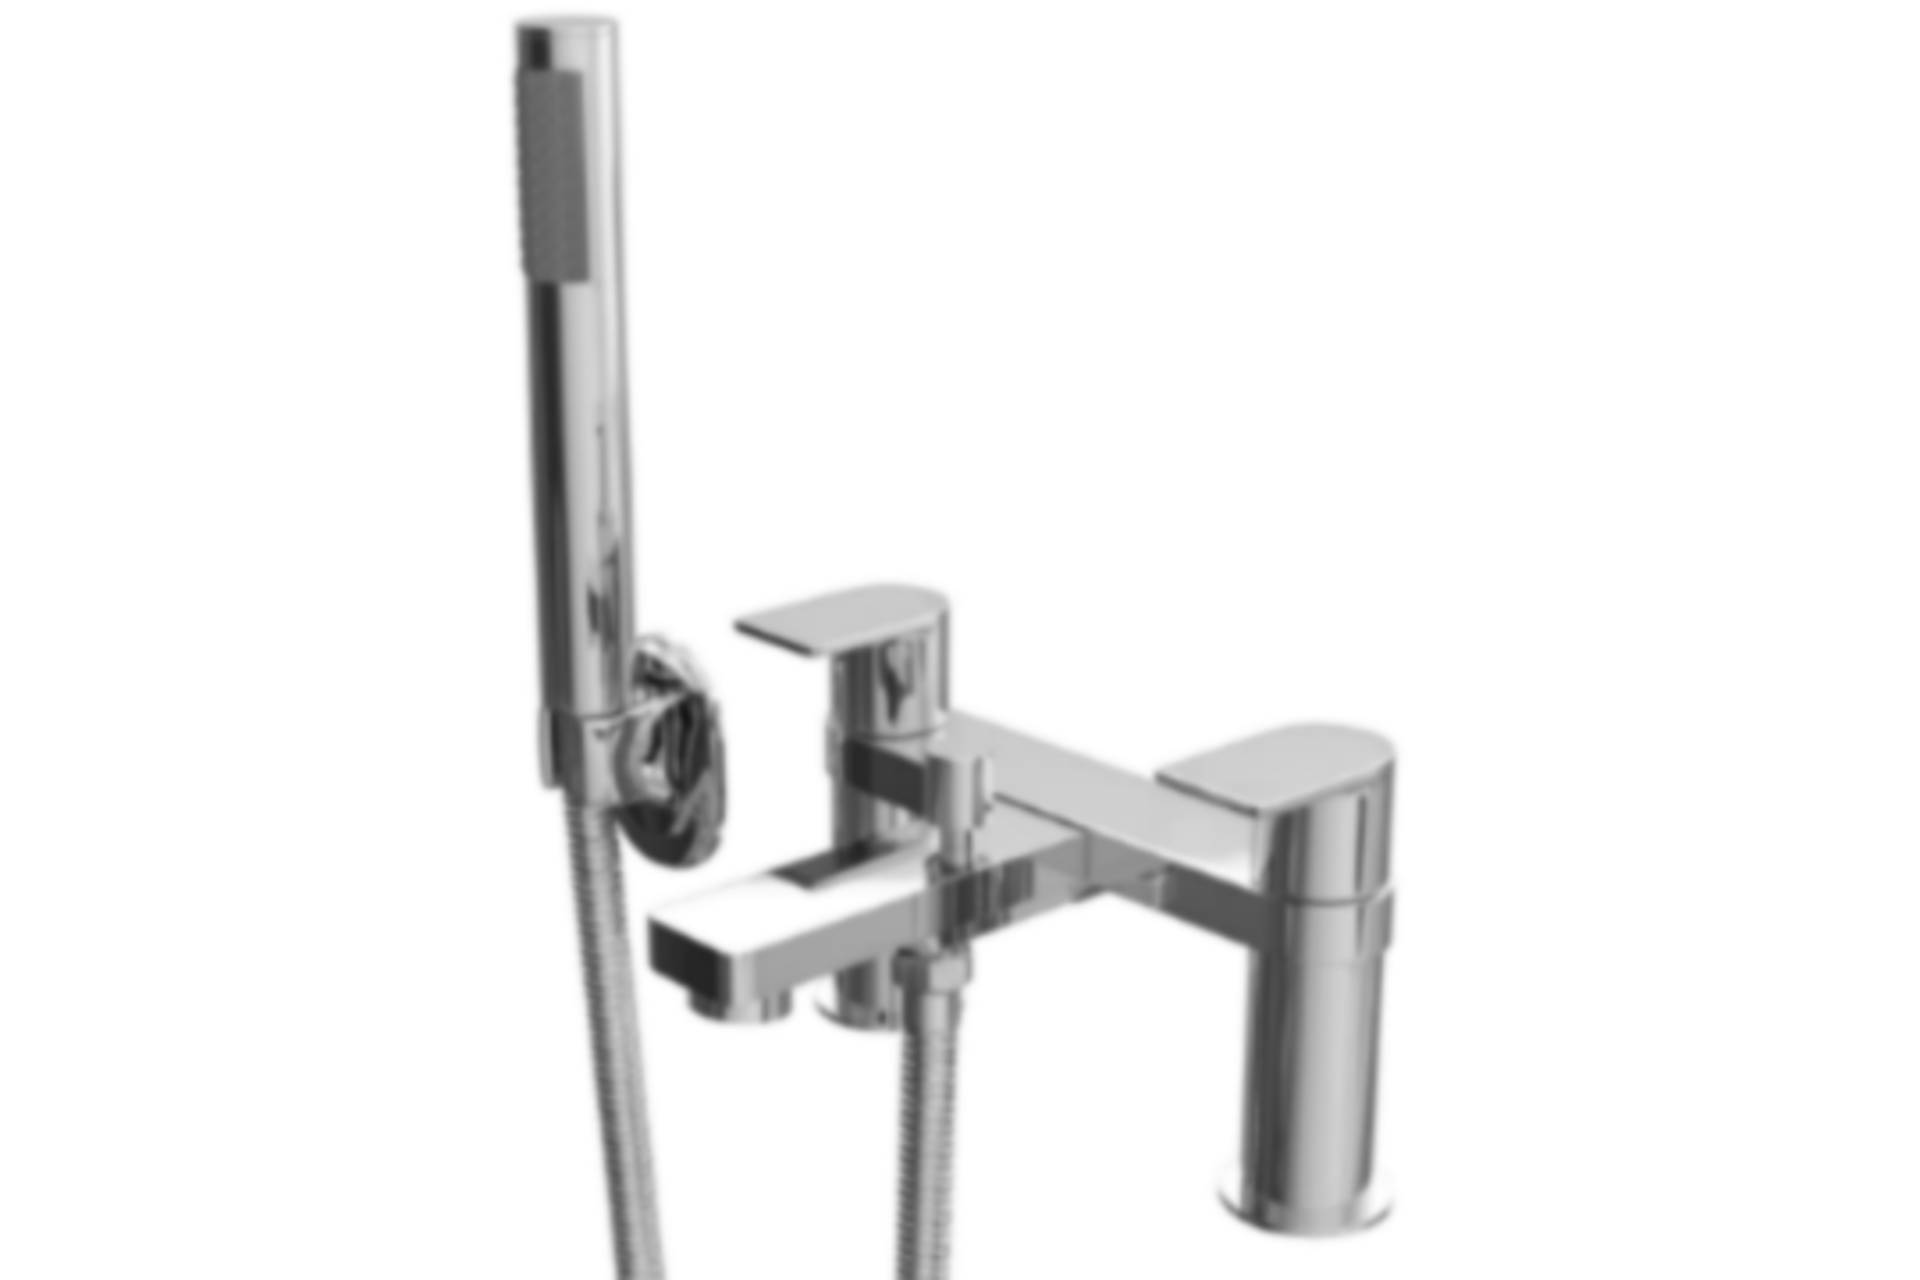 PALLET TO CONATIN 8 X BRAND NEW WIND BATH SHOWER MIXER WITH HOSE AND HANDSET RRP £179 PW